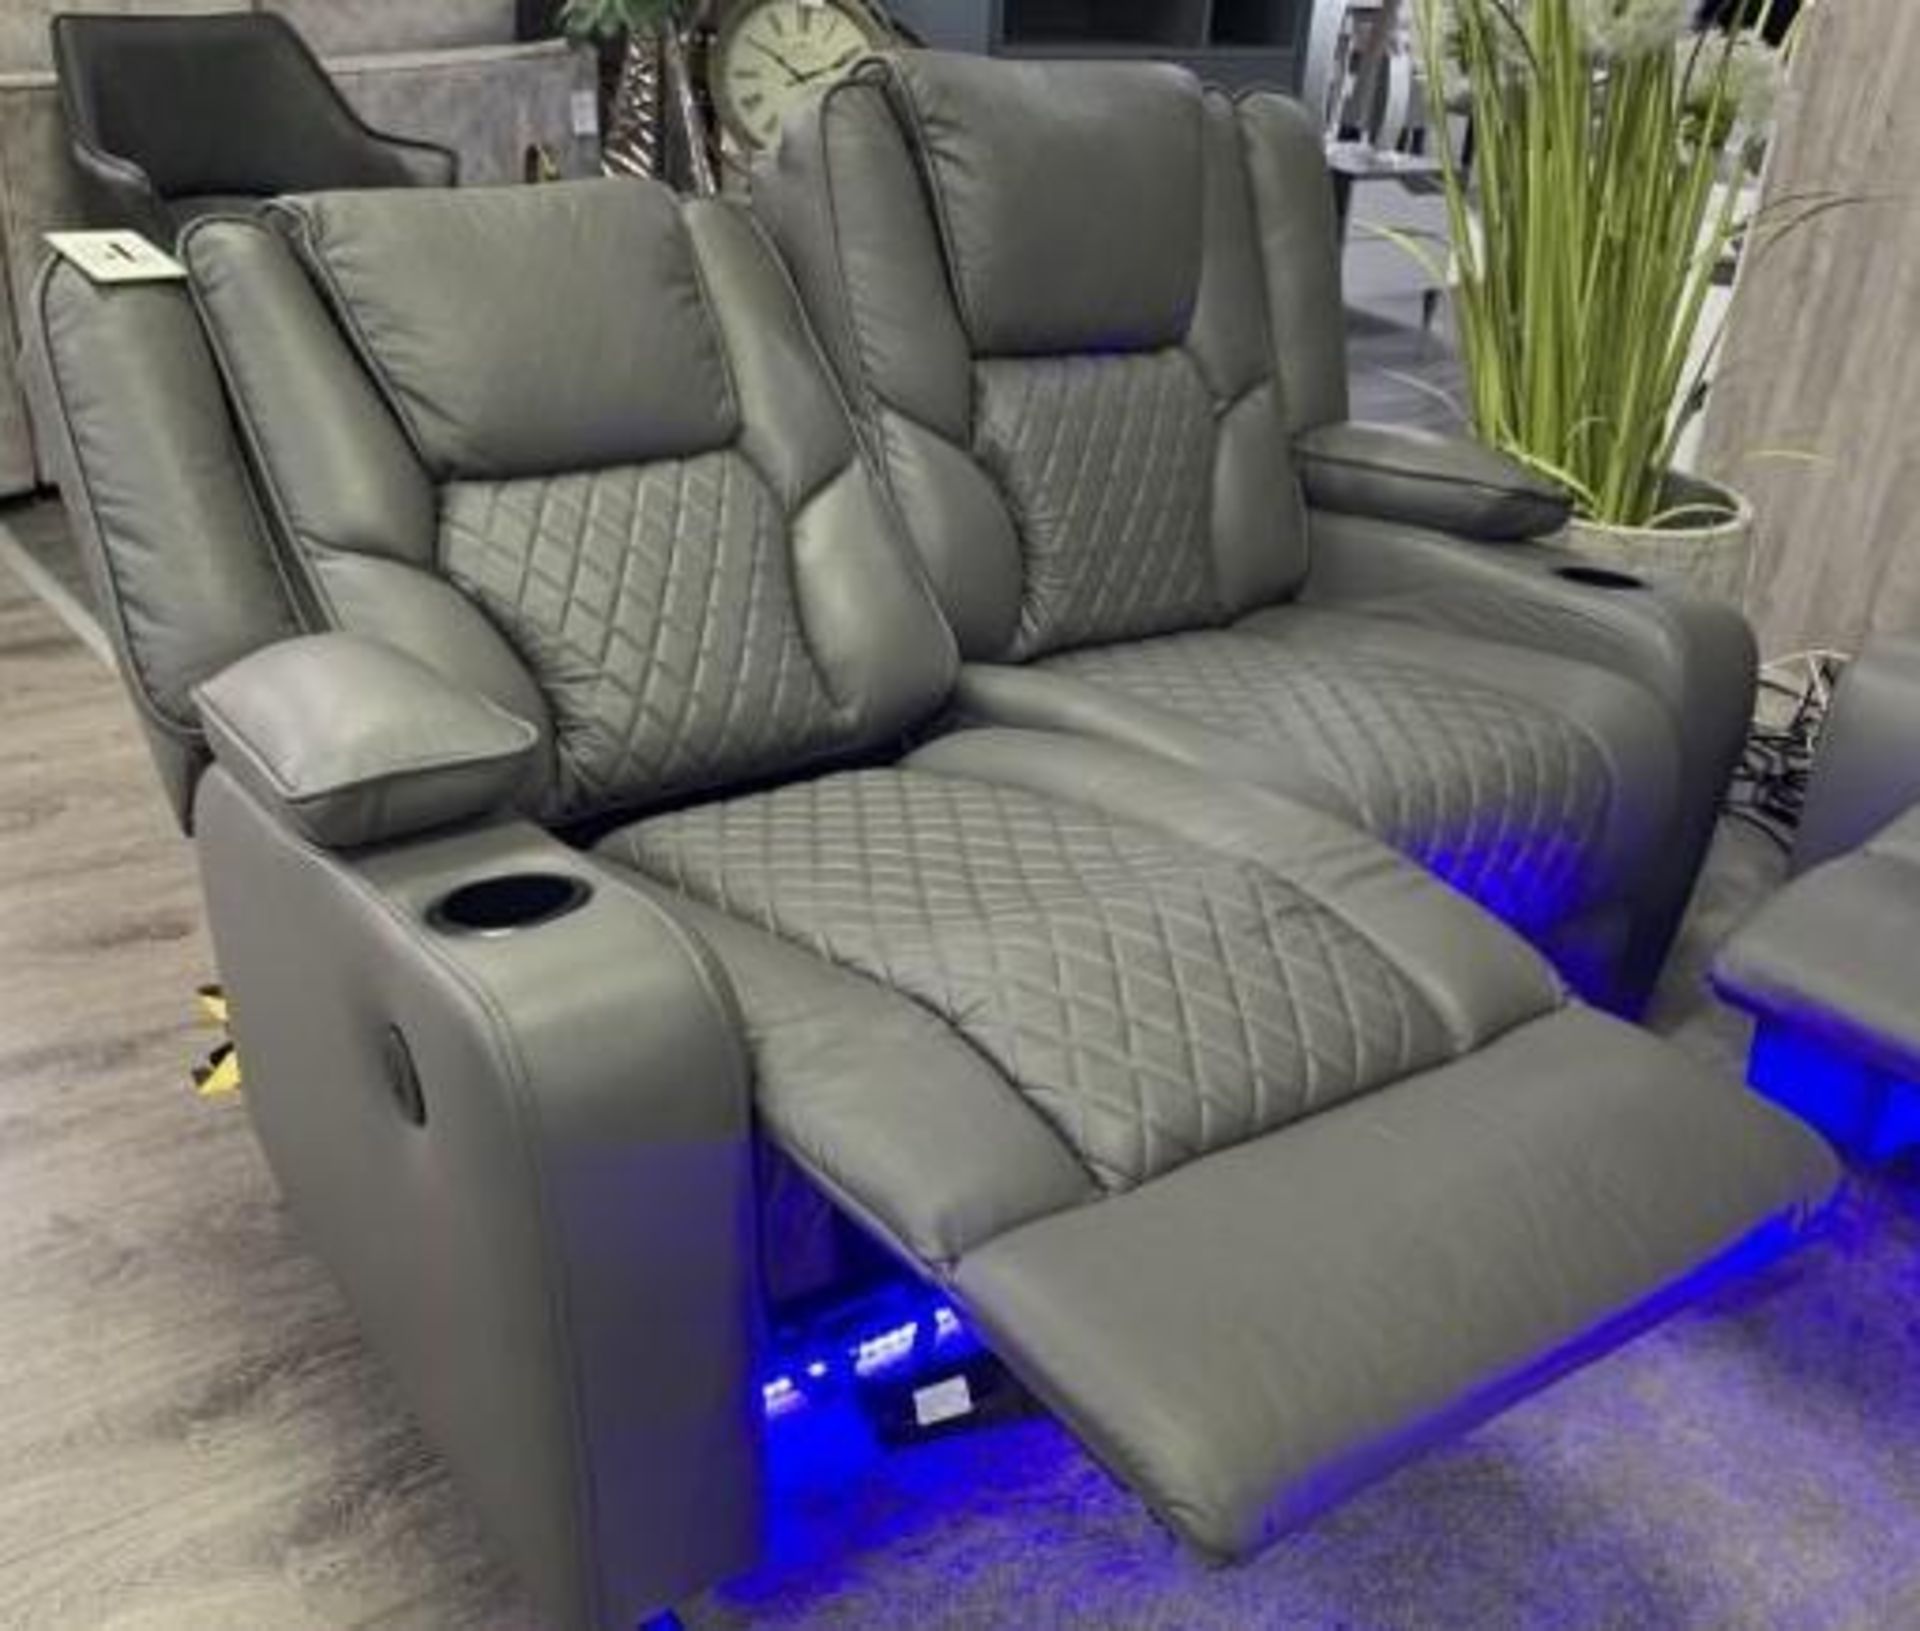 BRAND NEW Grey Leather 2 Seater Electric Recliner With USB Charging Port and Floor lights.